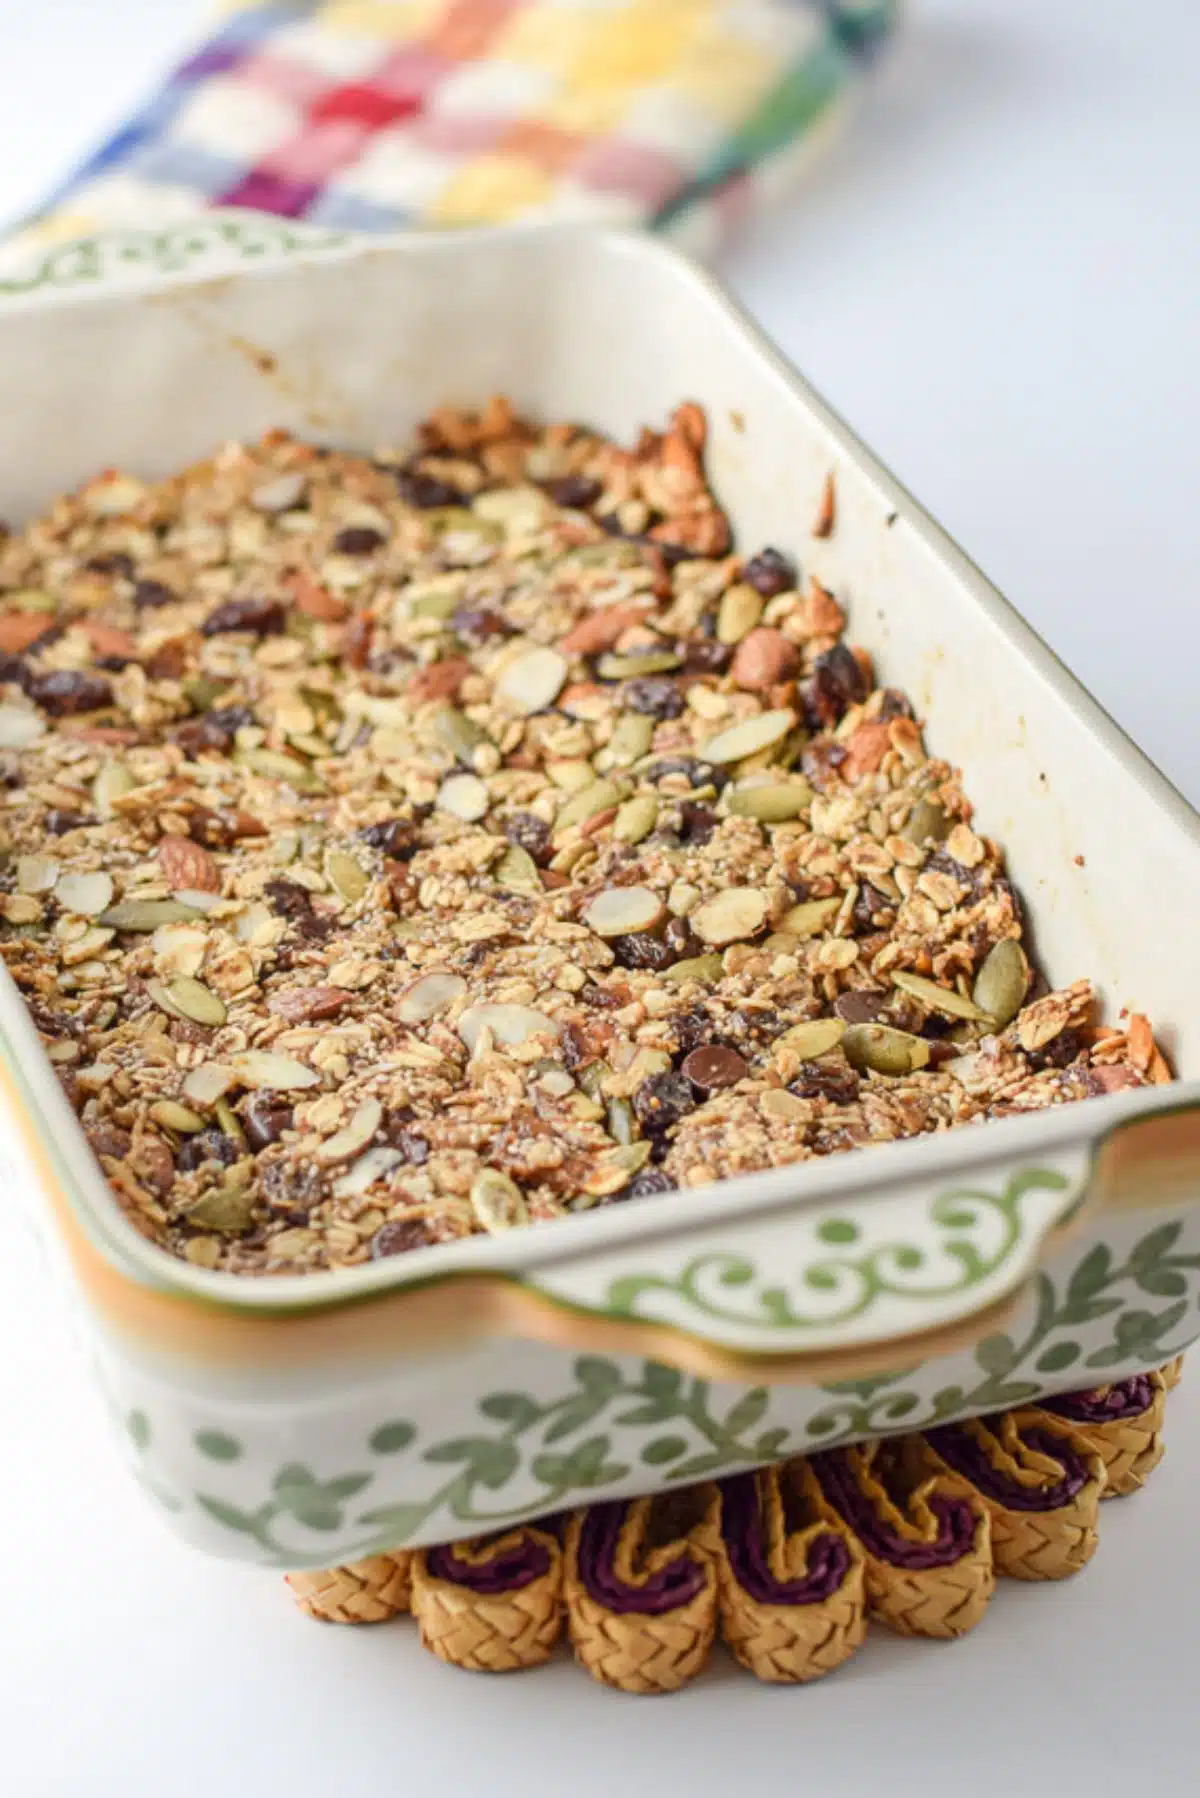 Baking dish fresh out of the oven with the granola bars in it